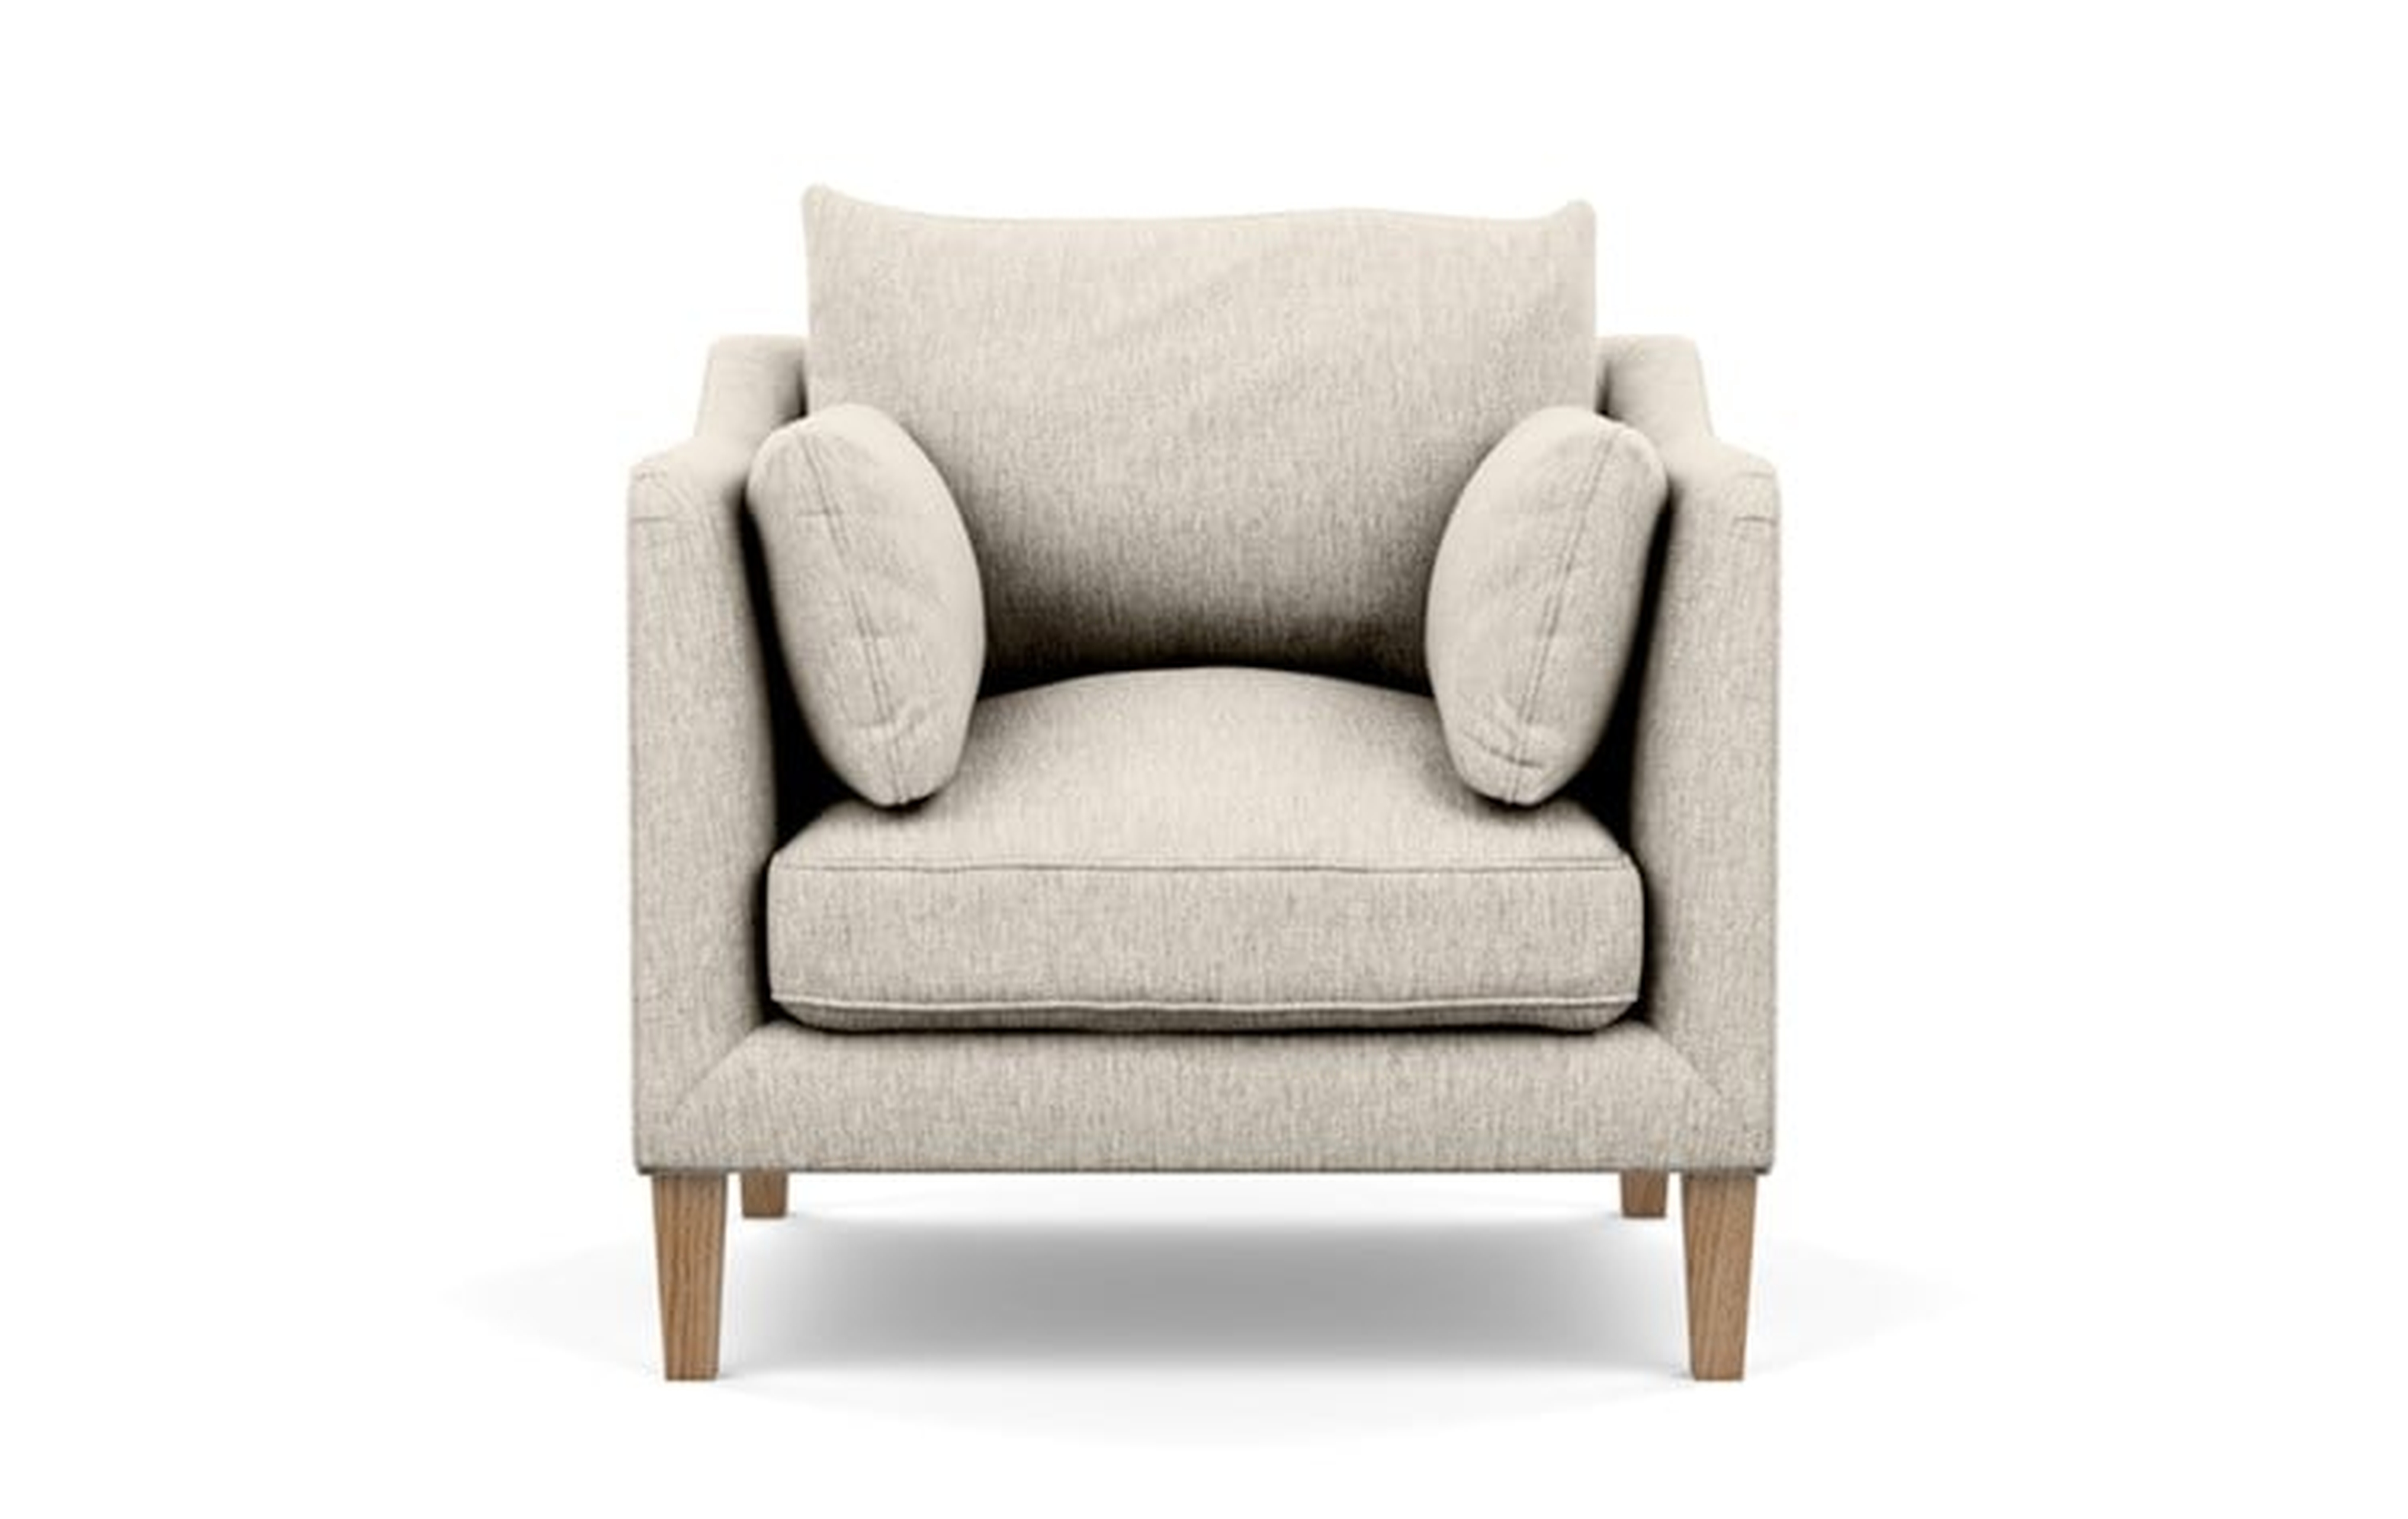 Caitlin by The Everygirl Petite Chair with Wheat Fabric and Natural Oak legs - Interior Define